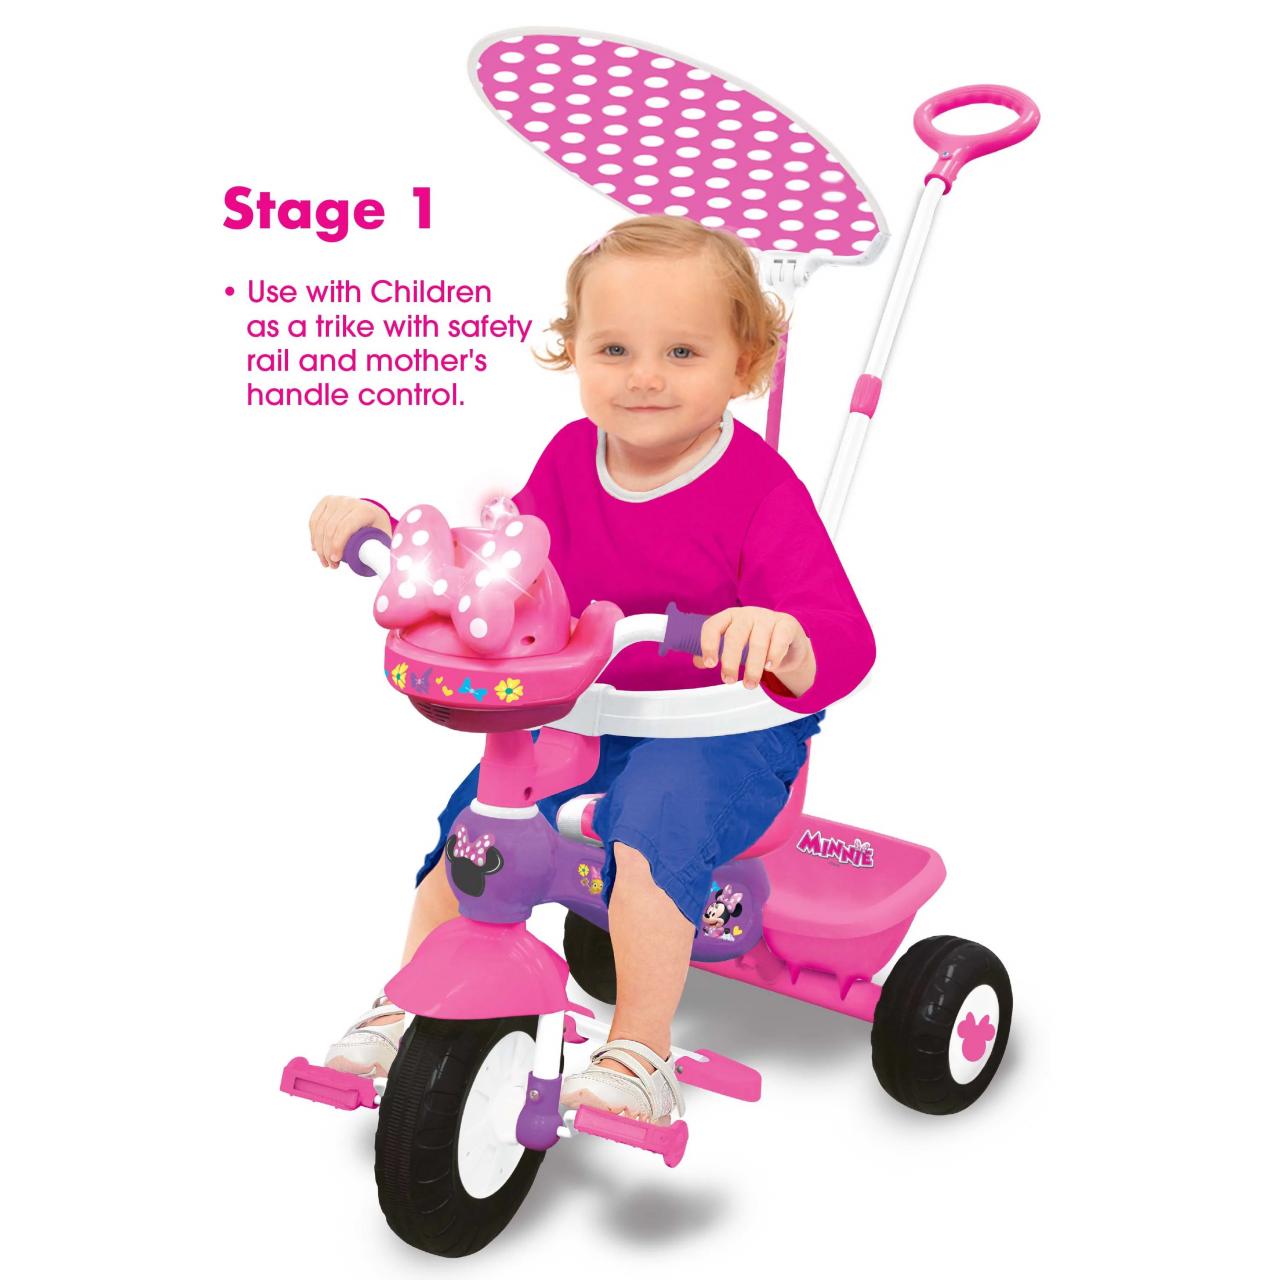 Disney Minnie Mouse Deluxe Trike RideOn with Lights and Sounds